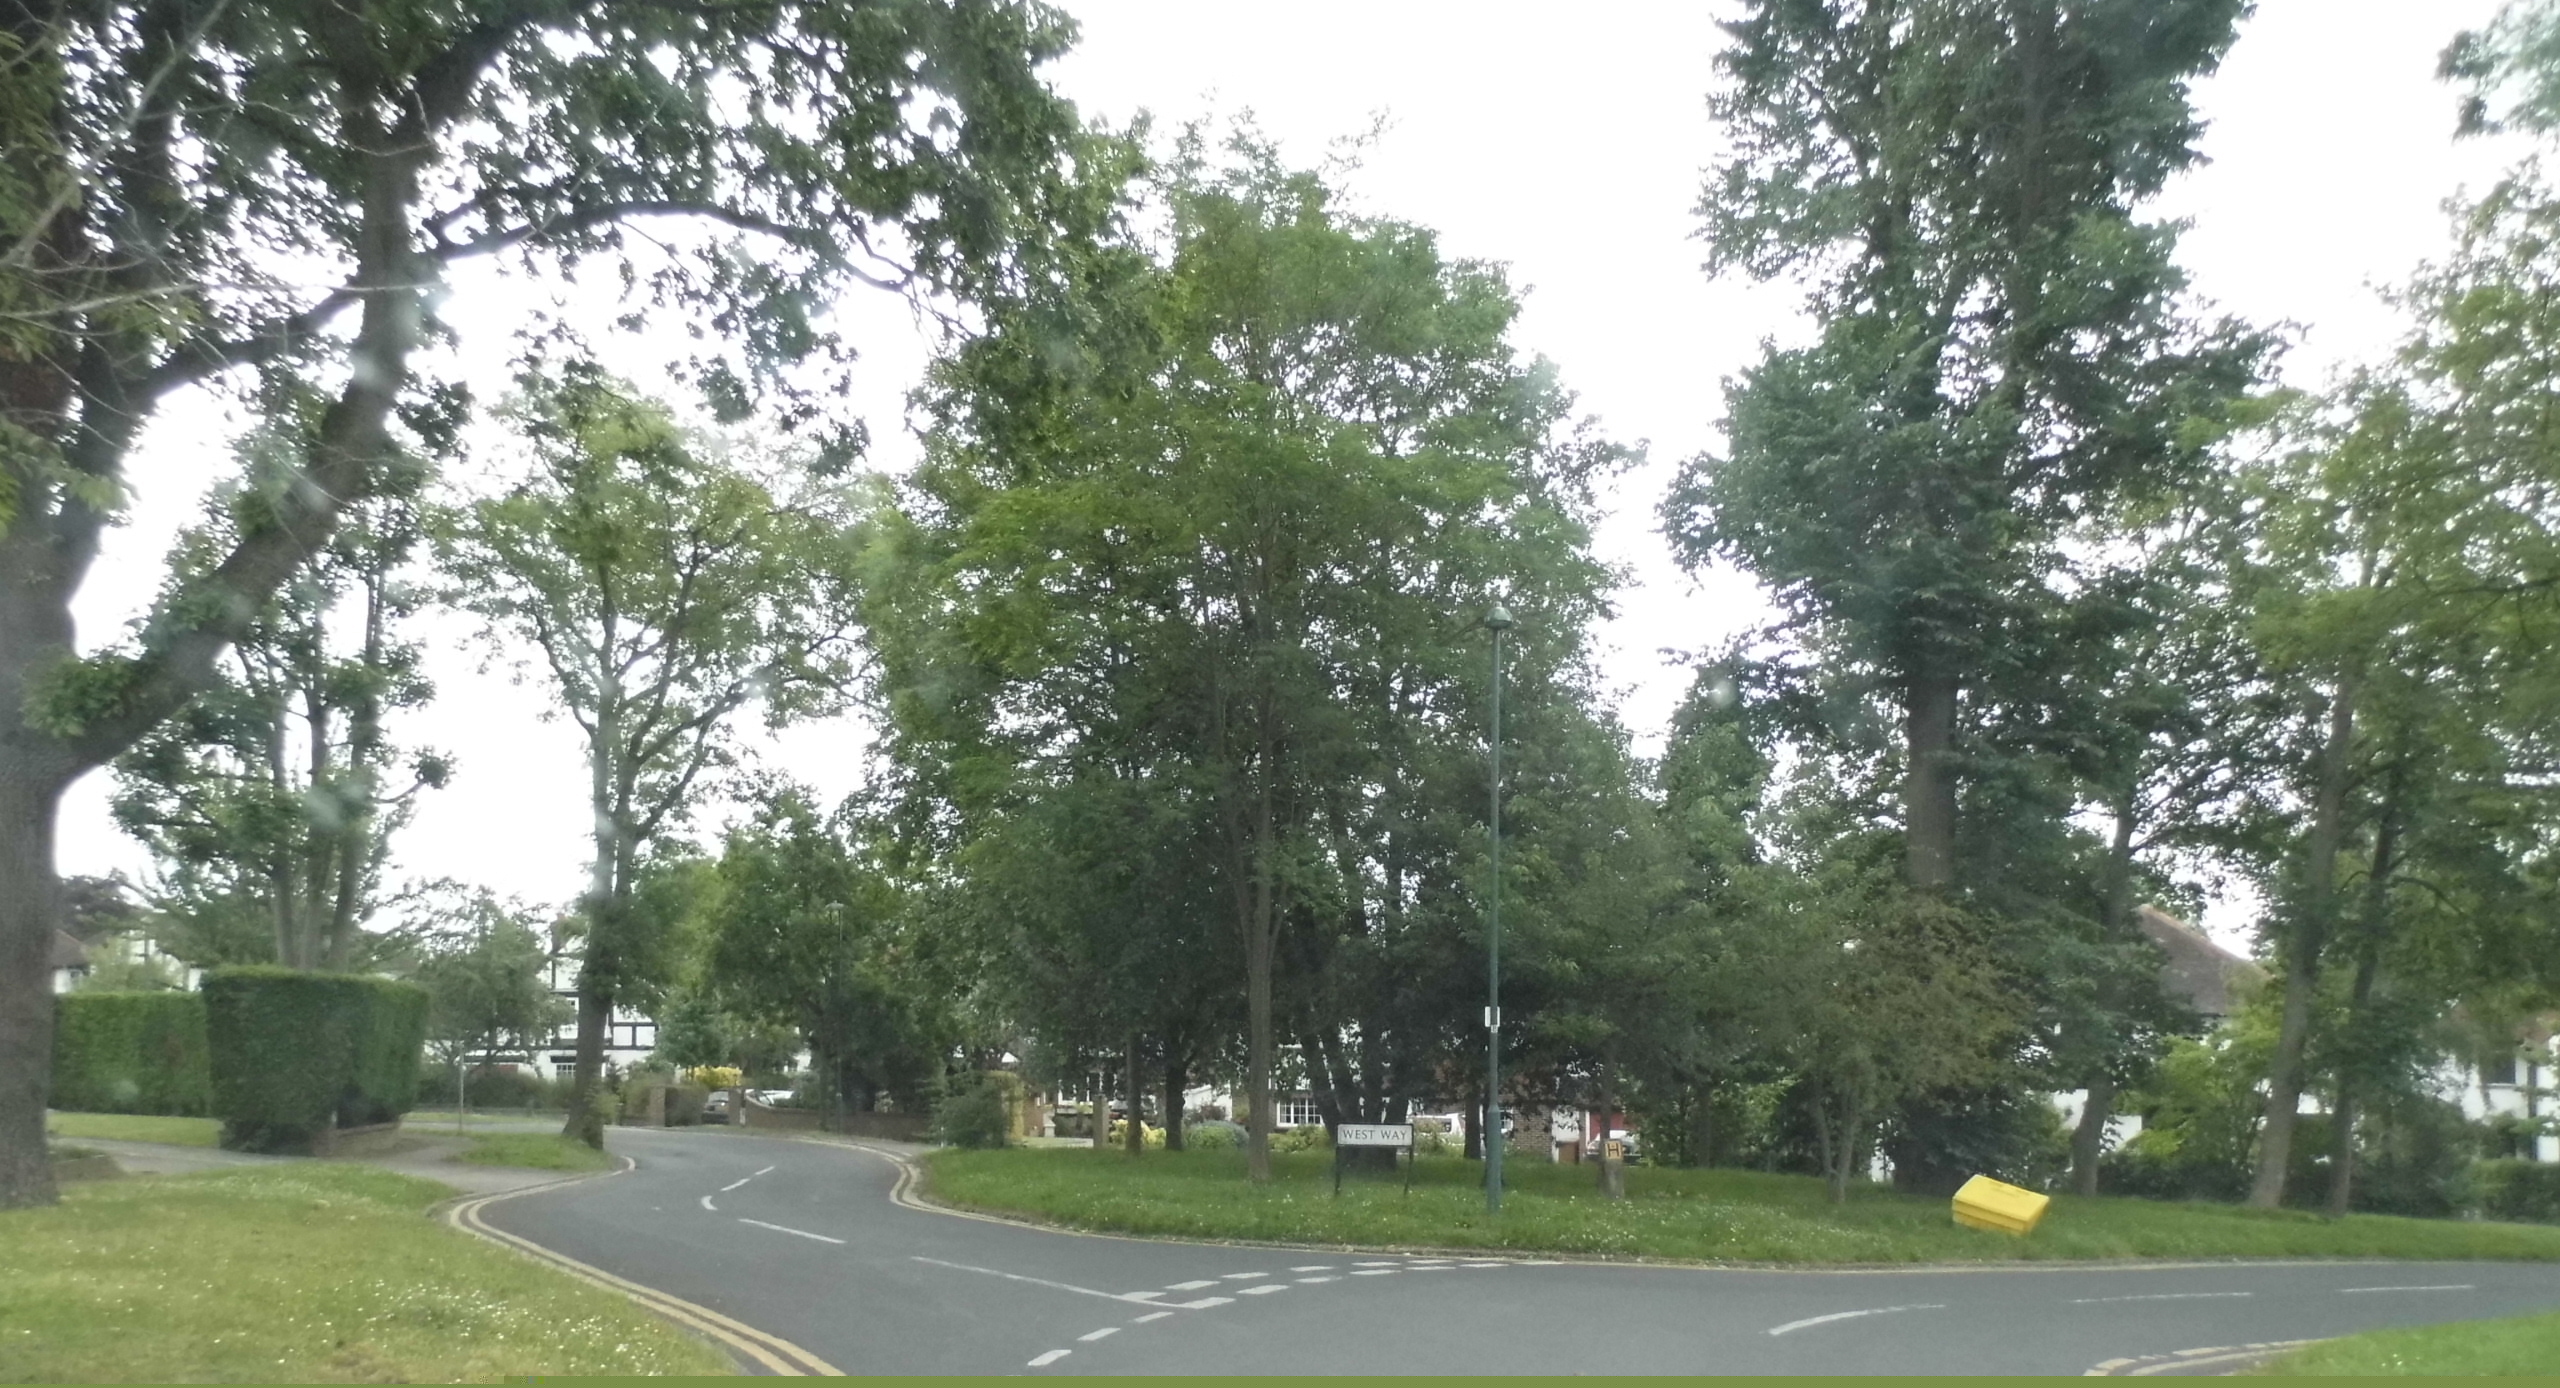 the view of a curve of the road showing how far the turn is